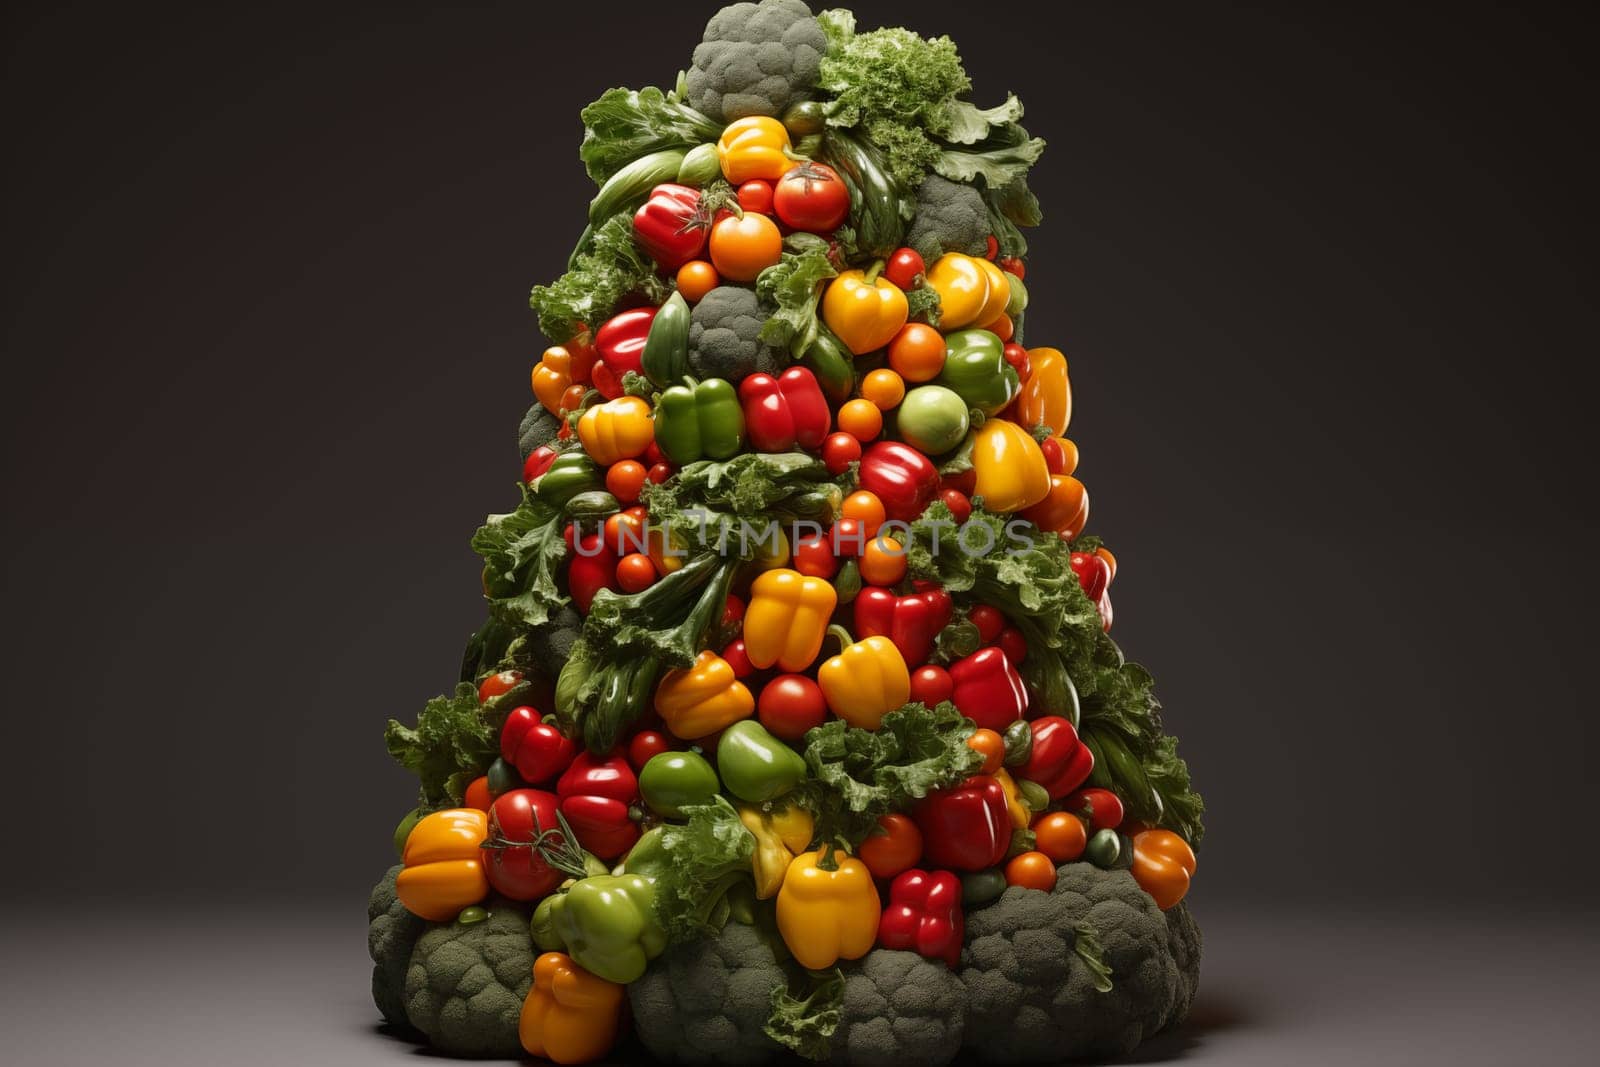 Christmas tree made of fresh vegetables in the shape of a pyramid,isolated on a gray background